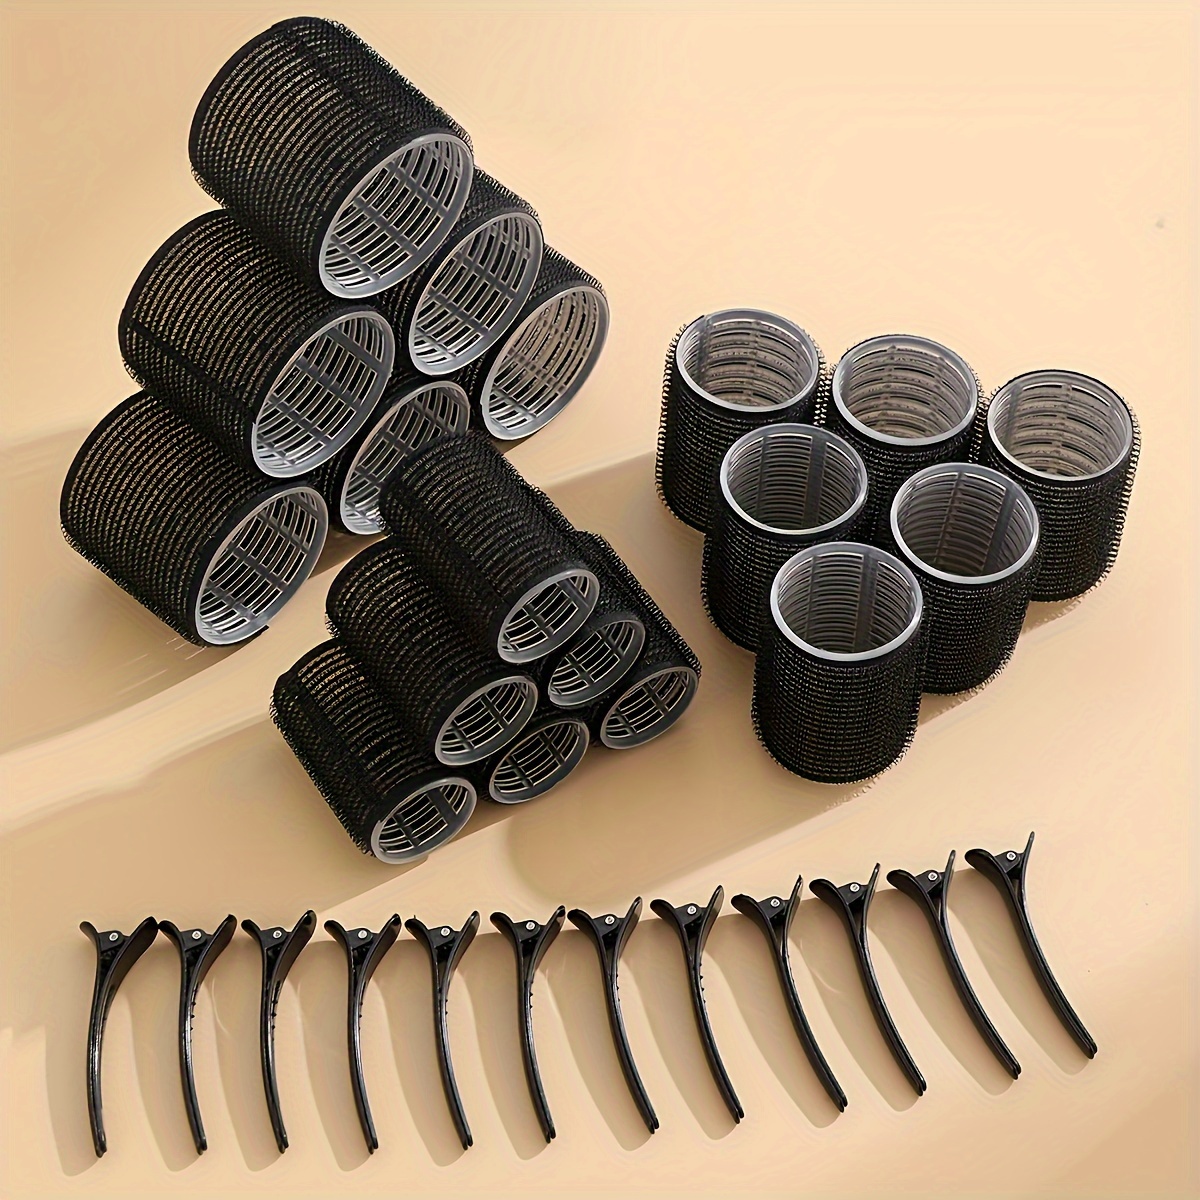 

30pcs/set Hair Curlers Set, 18 Self-grip Rollers & 12 Duckbill Clips, Diy Hairstyle Tools For Easy Waves And Curls